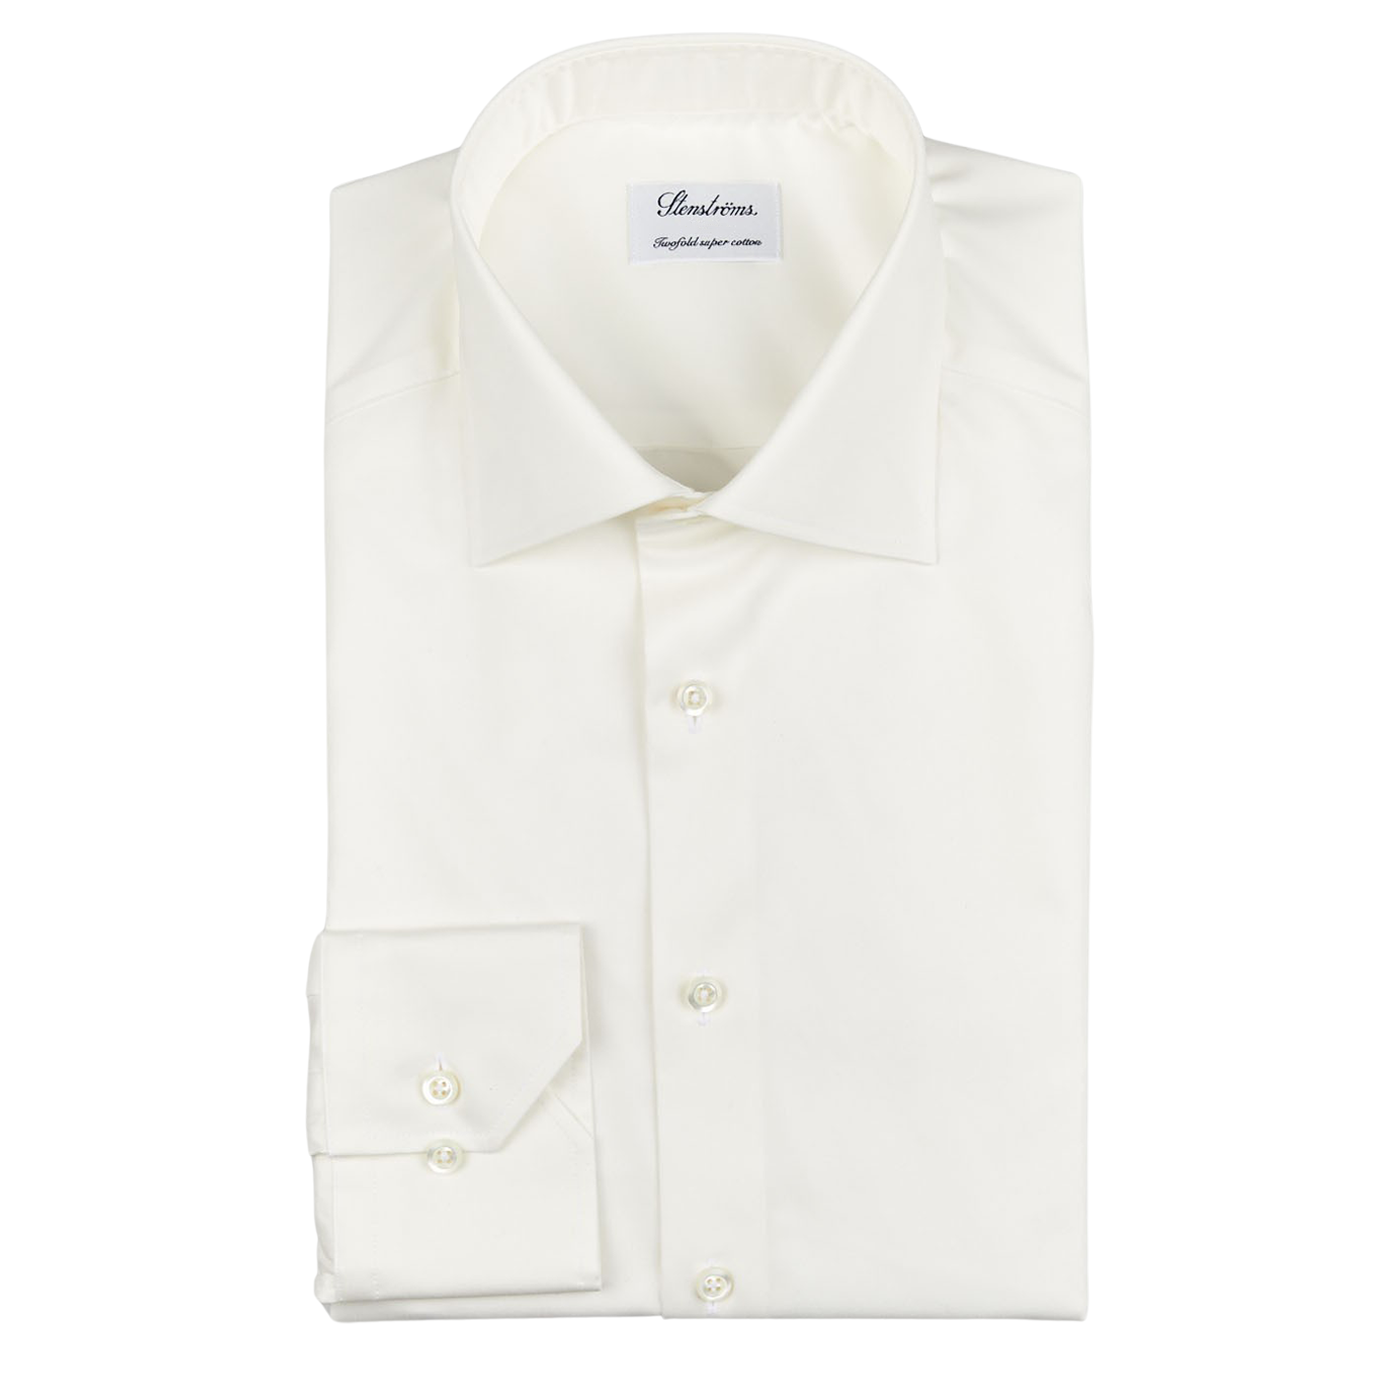 A Stenströms Off-White Cotton Twill Fitted Body Shirt with a comfortable fit on a white background.